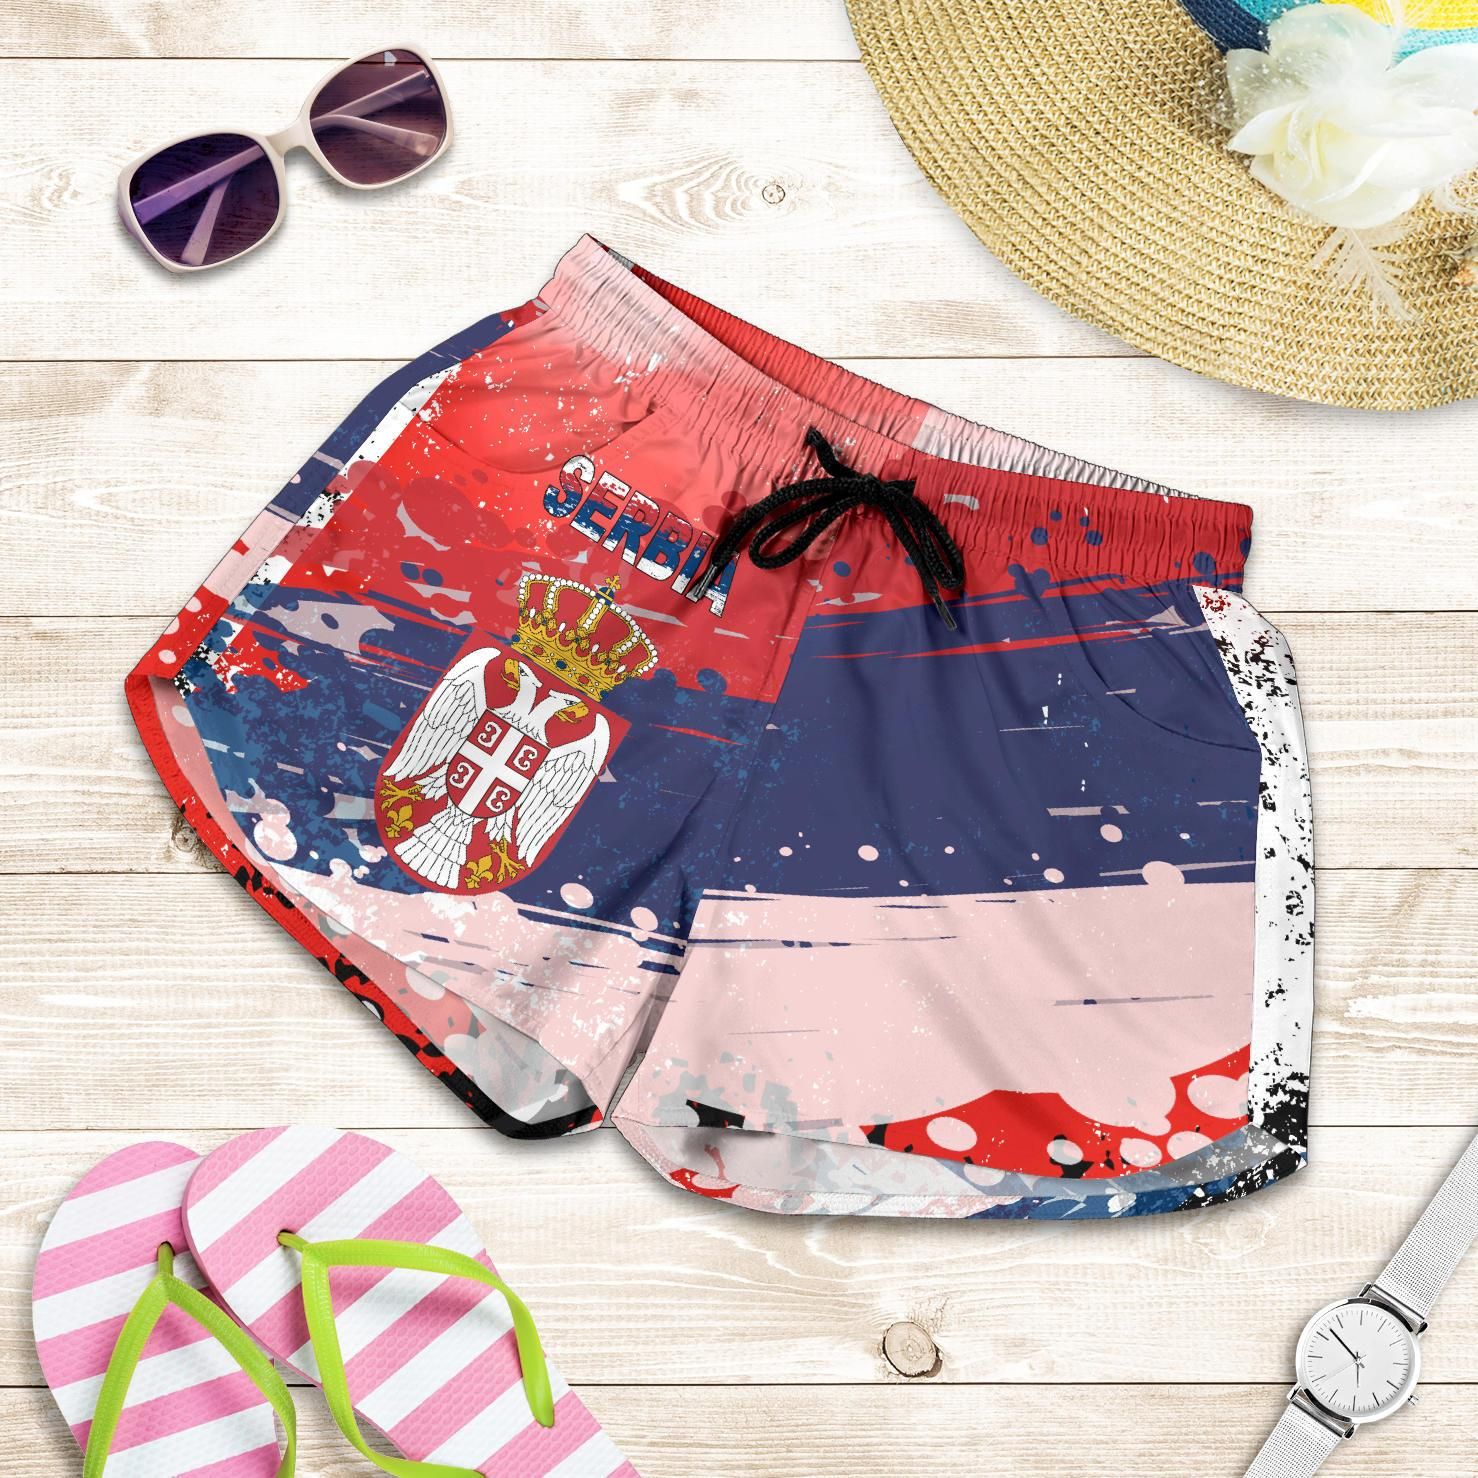 serbia-all-over-print-womens-shorts-serbia-national-flag-and-emblem